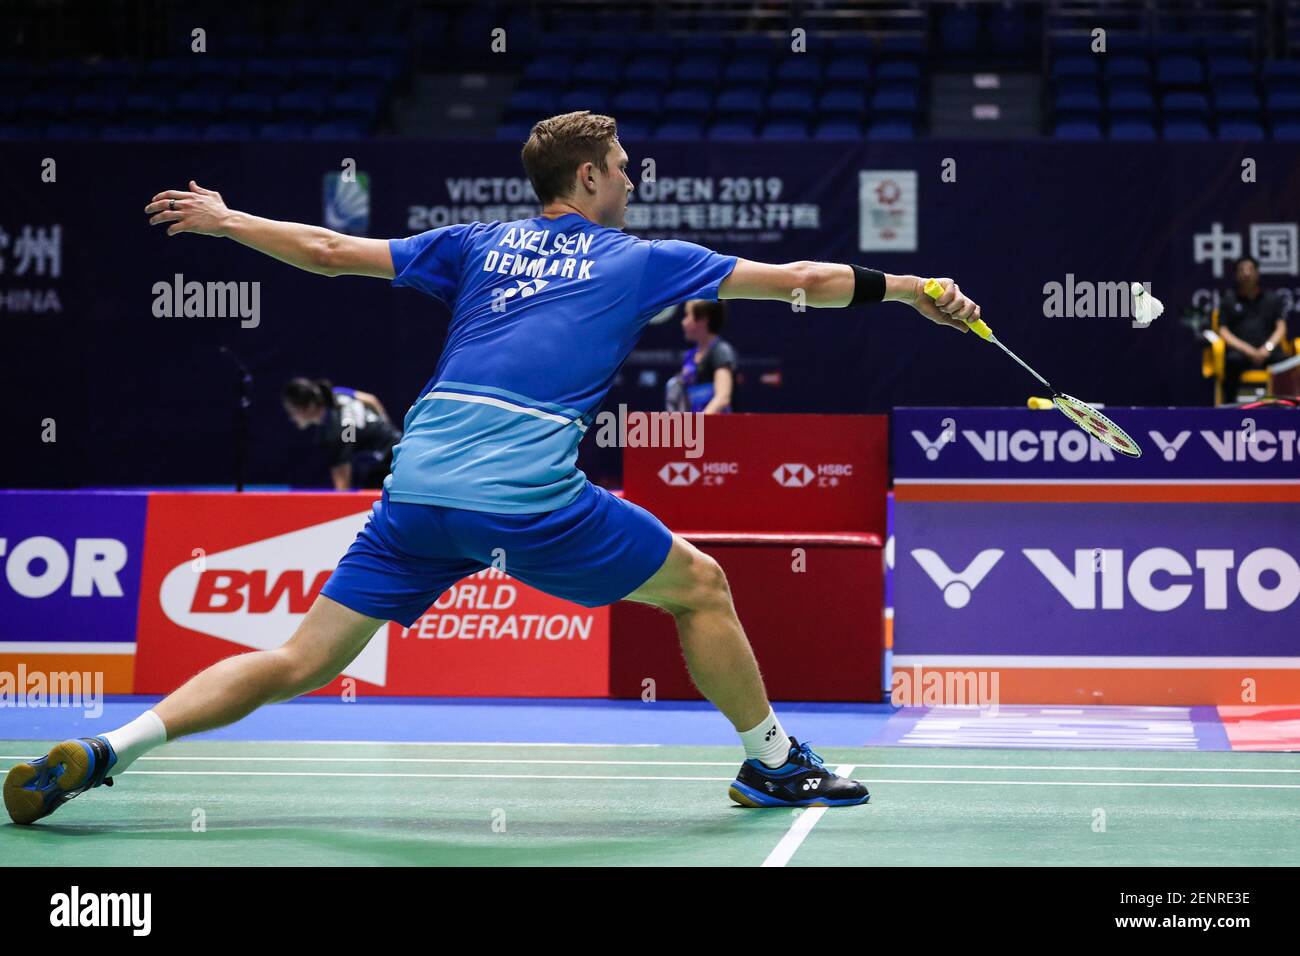 Danish professional badminton player Viktor Axelsen competes against  Japanese professional badminton player Kanta Tsuneyama at the first round  of VICTOR China Open 2019, in Changzhou city, east China's Jiangsu  province, 17 September